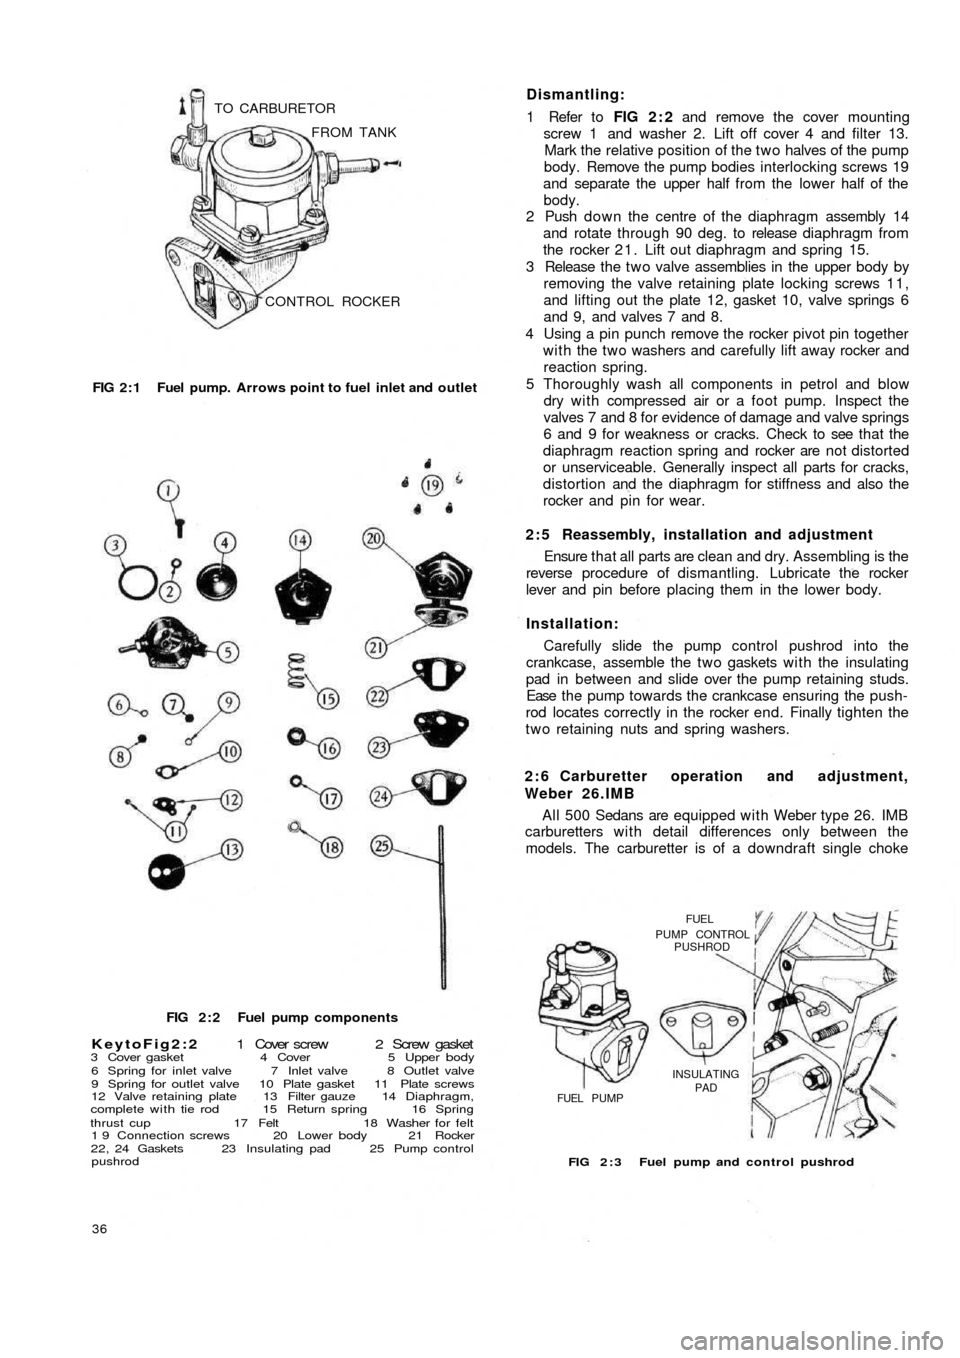 FIAT 500 1969 1.G Workshop Manual CONTROL ROCKER FROM TANK TO CARBURETOR
FIG 2 : 1  Fuel pump. Arrows point to fuel  inlet and outlet
FIG 2 : 2  Fuel pump components
KeytoFig2:2 1  Cover  screw  2  Screw  gasket3 Cover gasket 4 Cover 